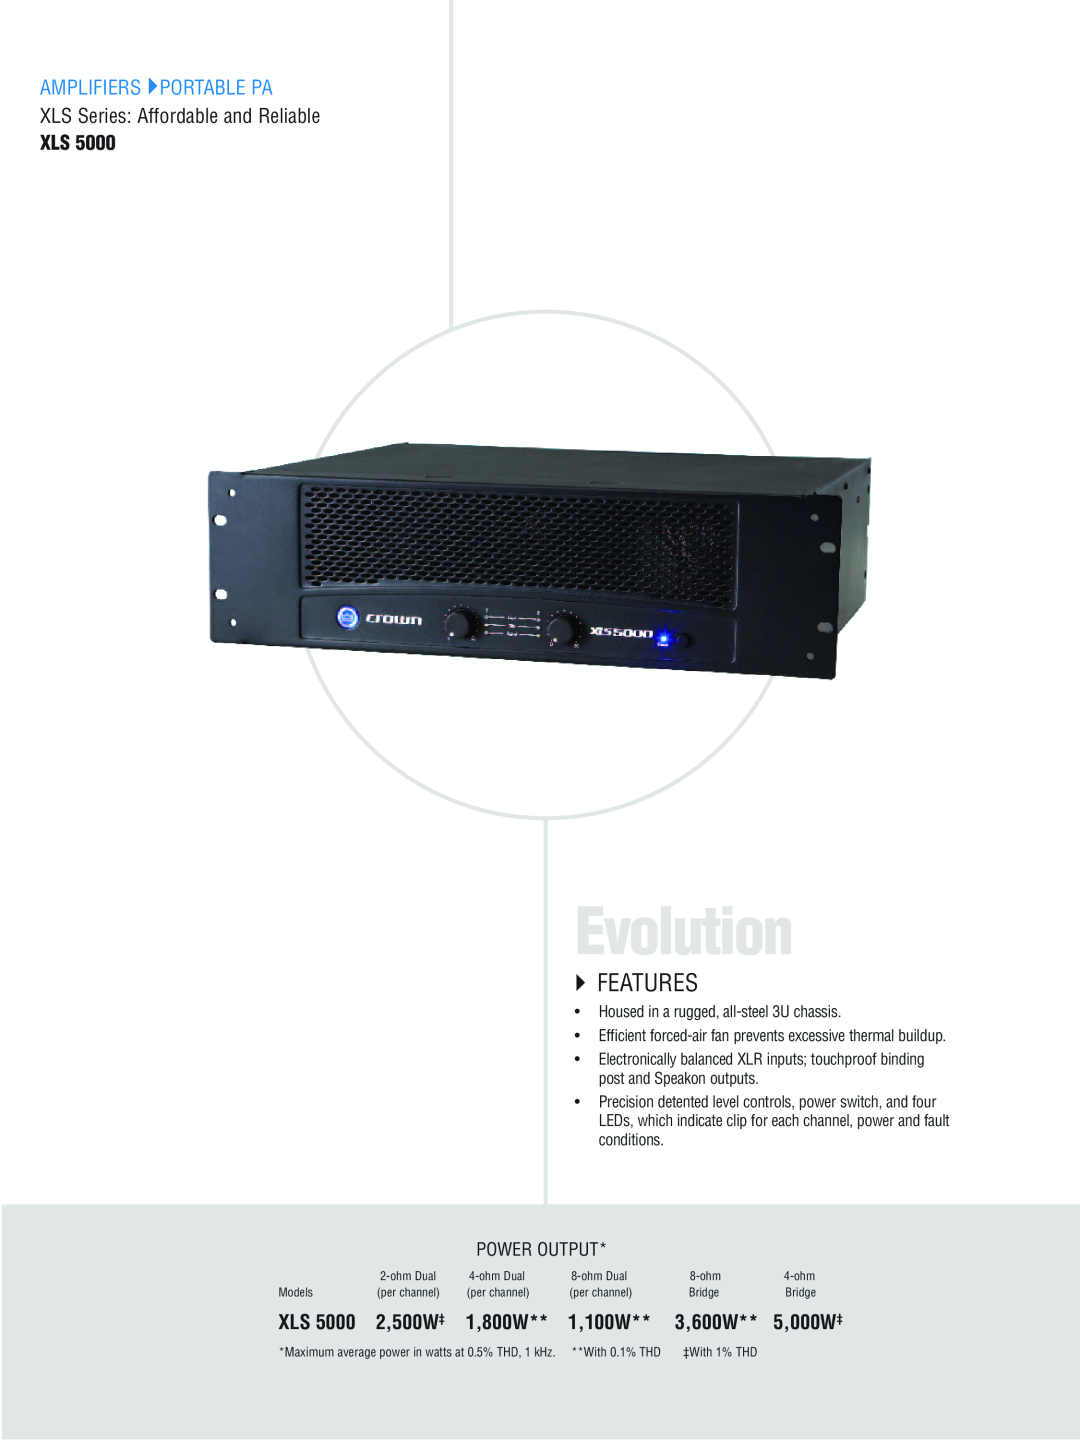 Crown CTS 3000 Evolution, XLS Series: Affordable and Reliable, `` Features, Amplifiers Portable Pa, Power Output, 2,500W‡ 